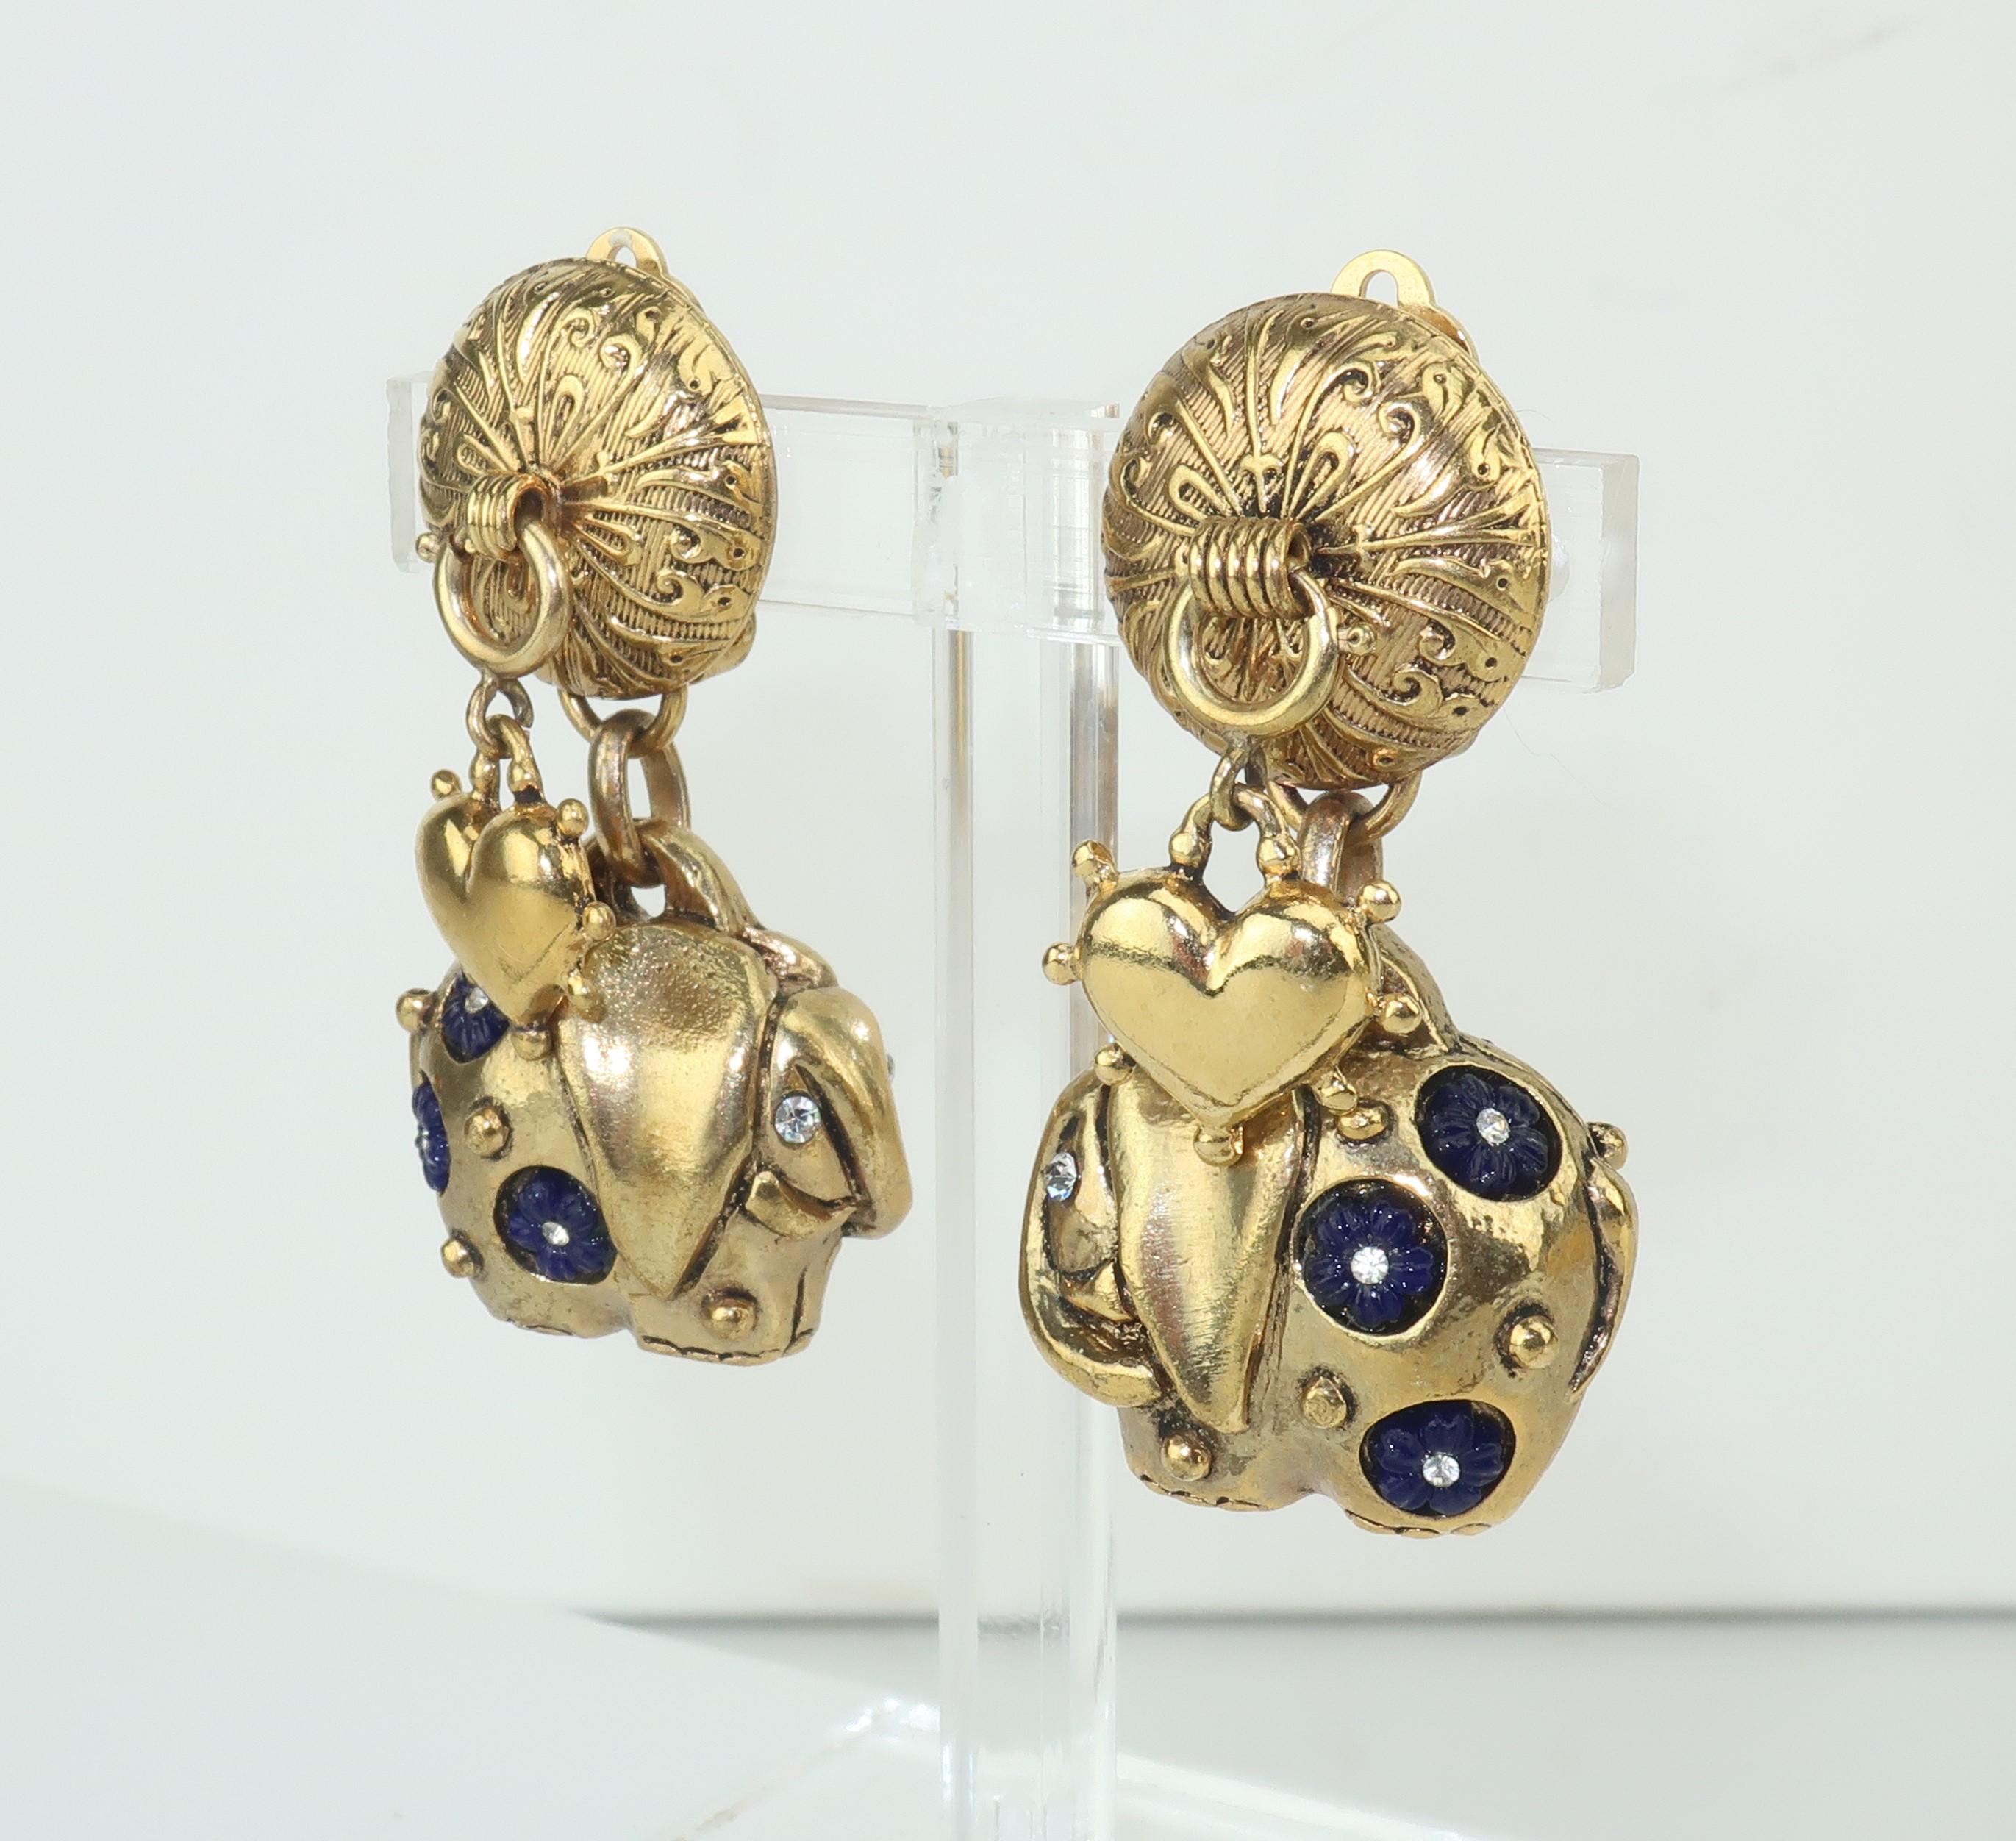 Charming!  Gold tone clip on earrings by Zoe Coste featuring hearts and elephants festooned with midnight blue glass and crystal rhinestones.  The dangling pieces are reminiscent of a charm bracelet with the hearts actually attached by a spring ring